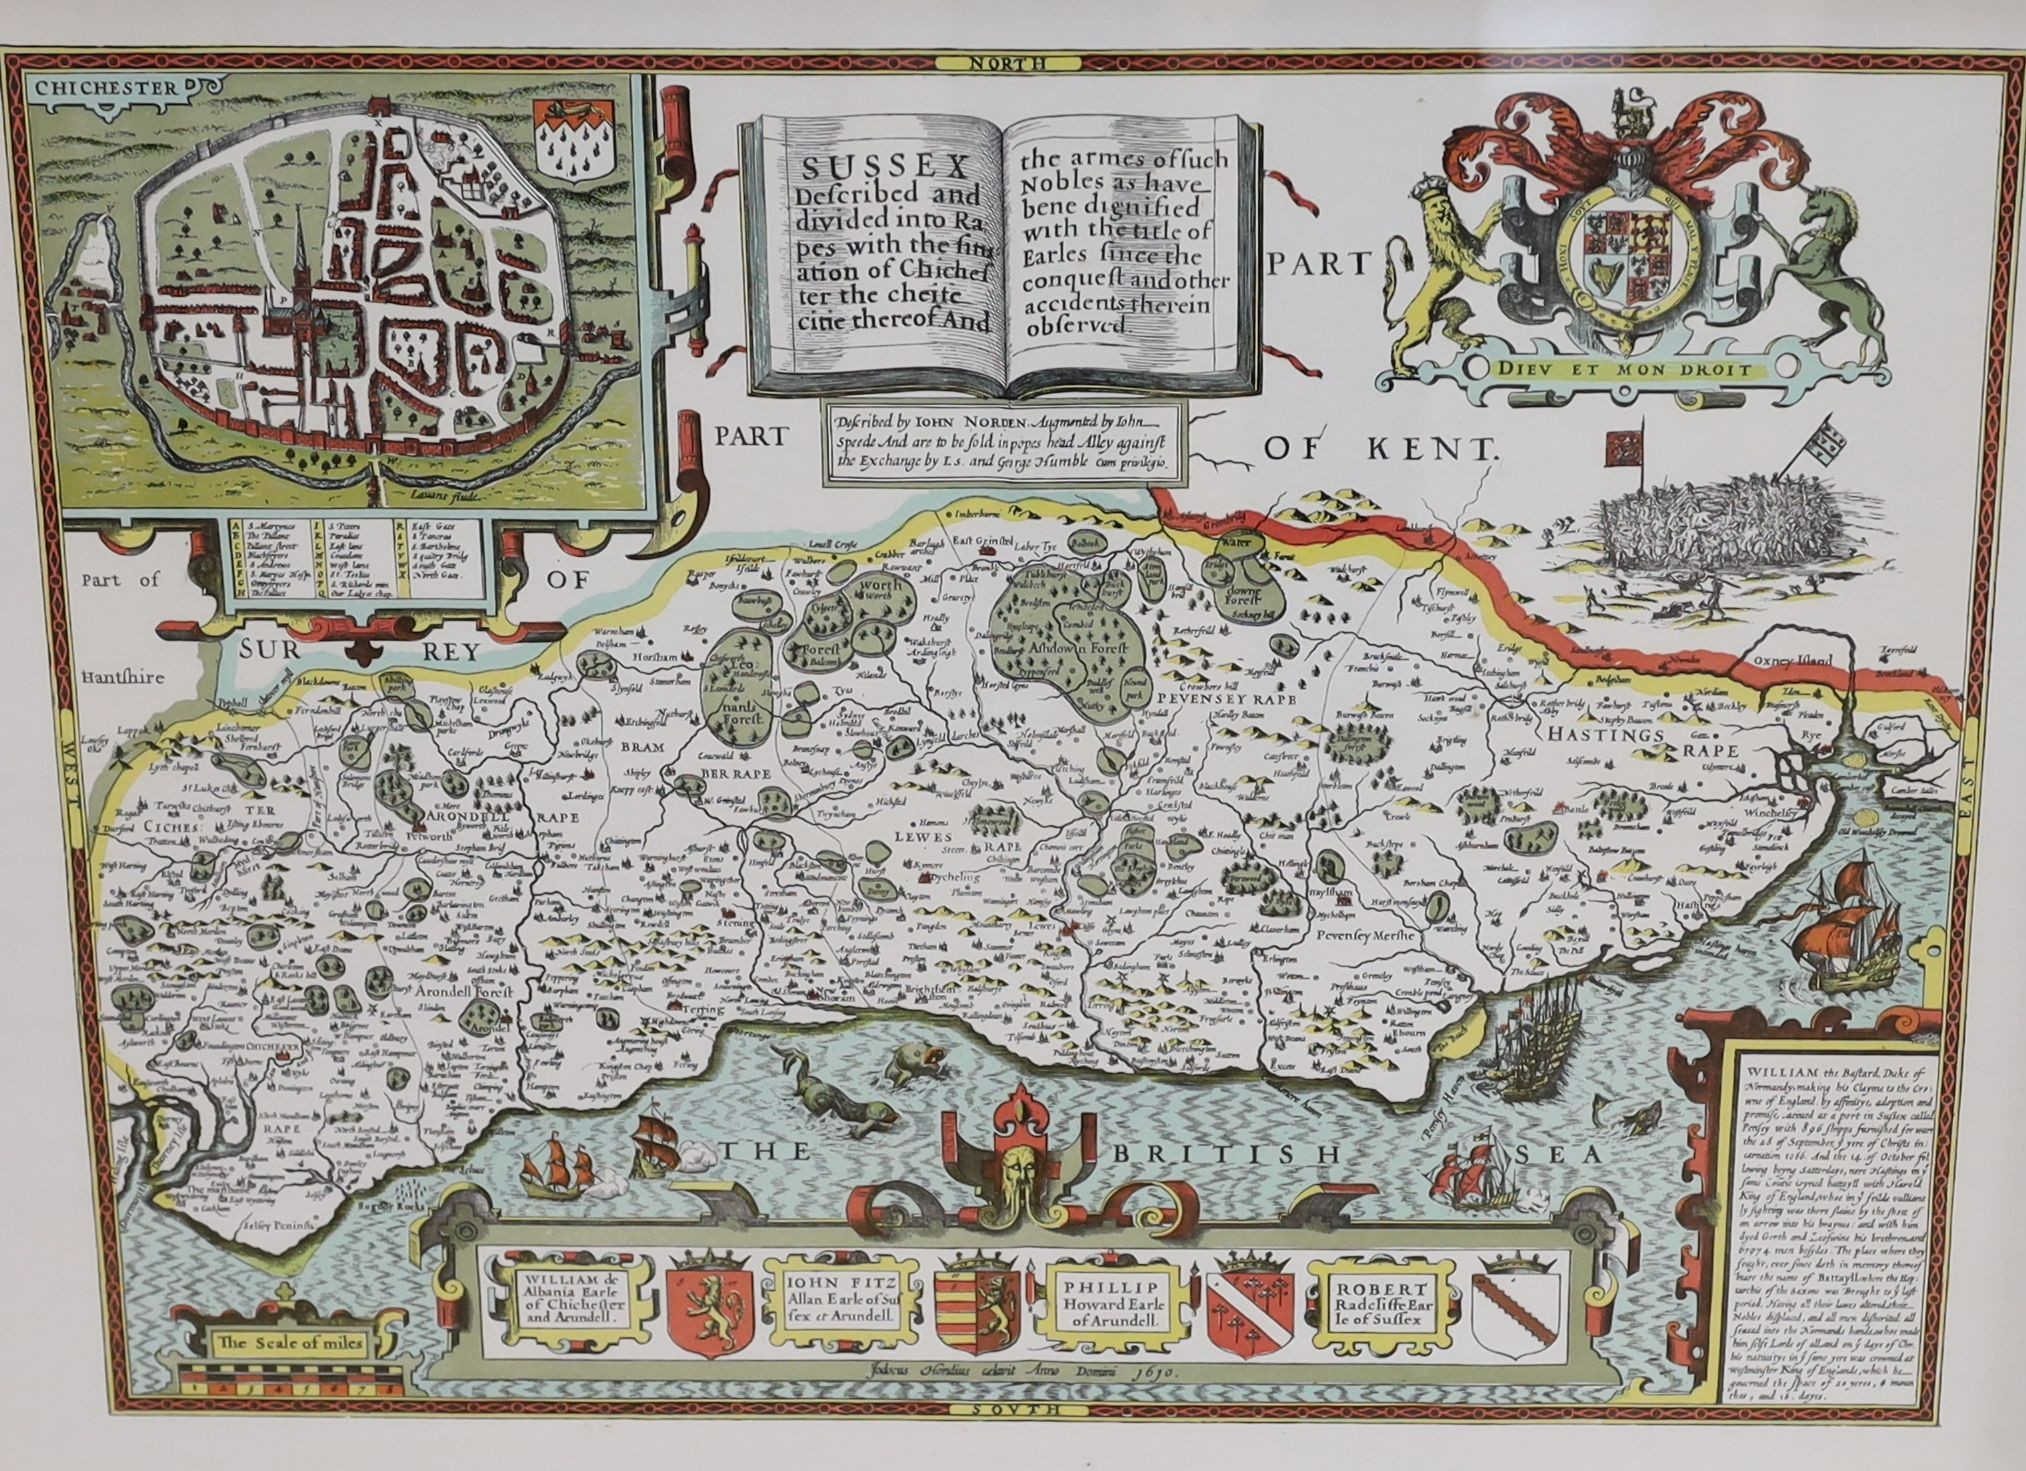 Two 19th century hand coloured steel engraved maps, The Hundreds of Tenterden, Blackborne, Oxney and Ham, and The Hundreds of Cale Hill and Chart and Longbridge, largest 46 x 38cm, with a reprinted map of Sussex